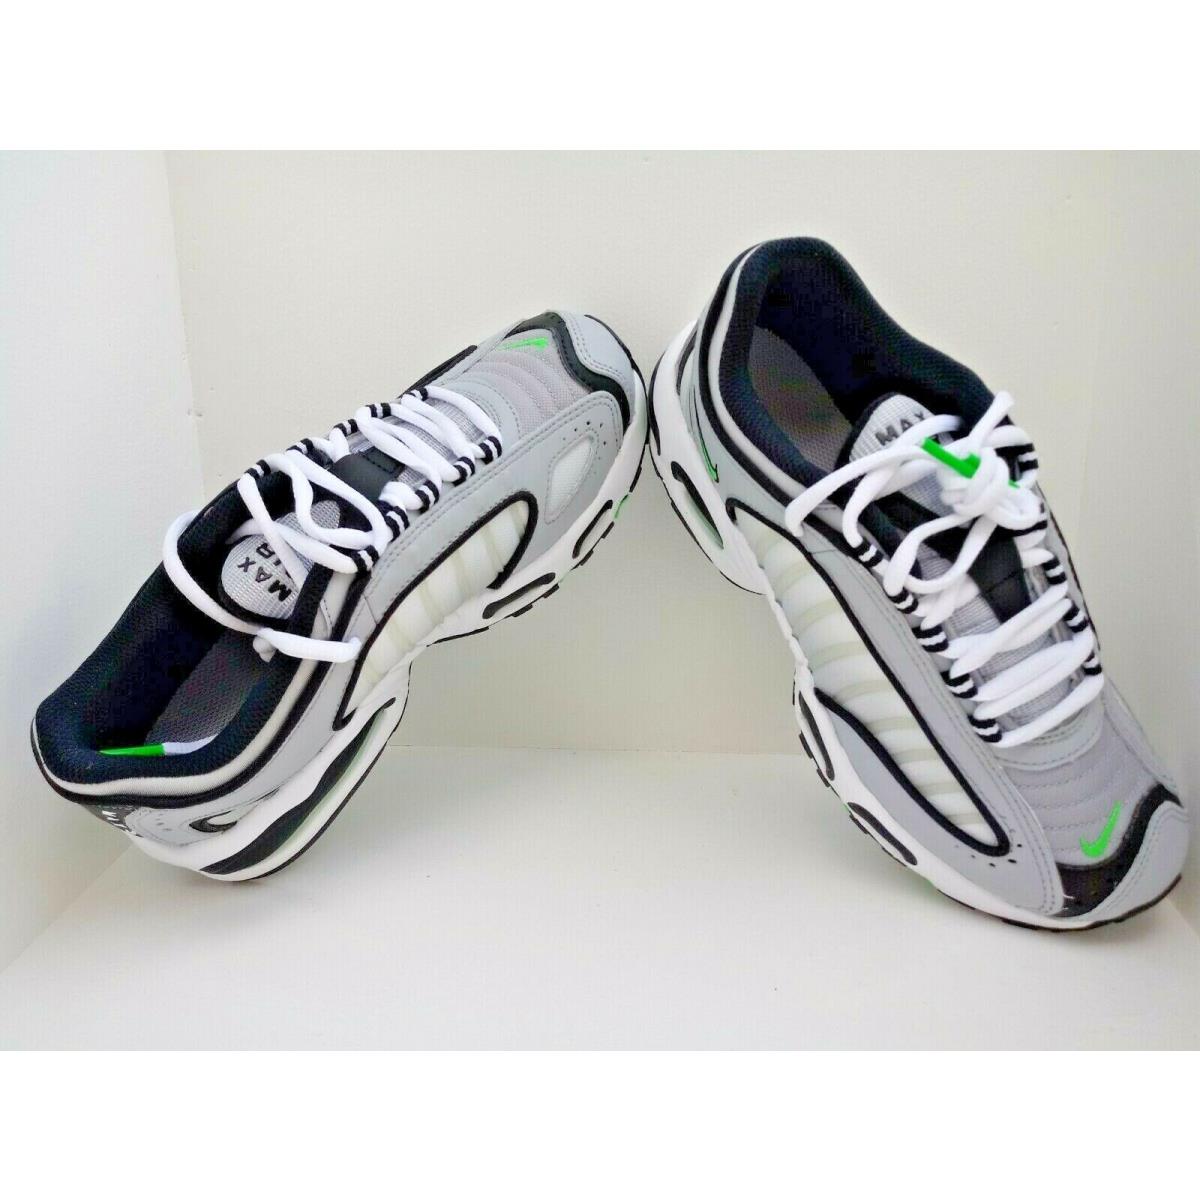 Nike shoes  - Wolf Grey/Black-Green Spark-White 1